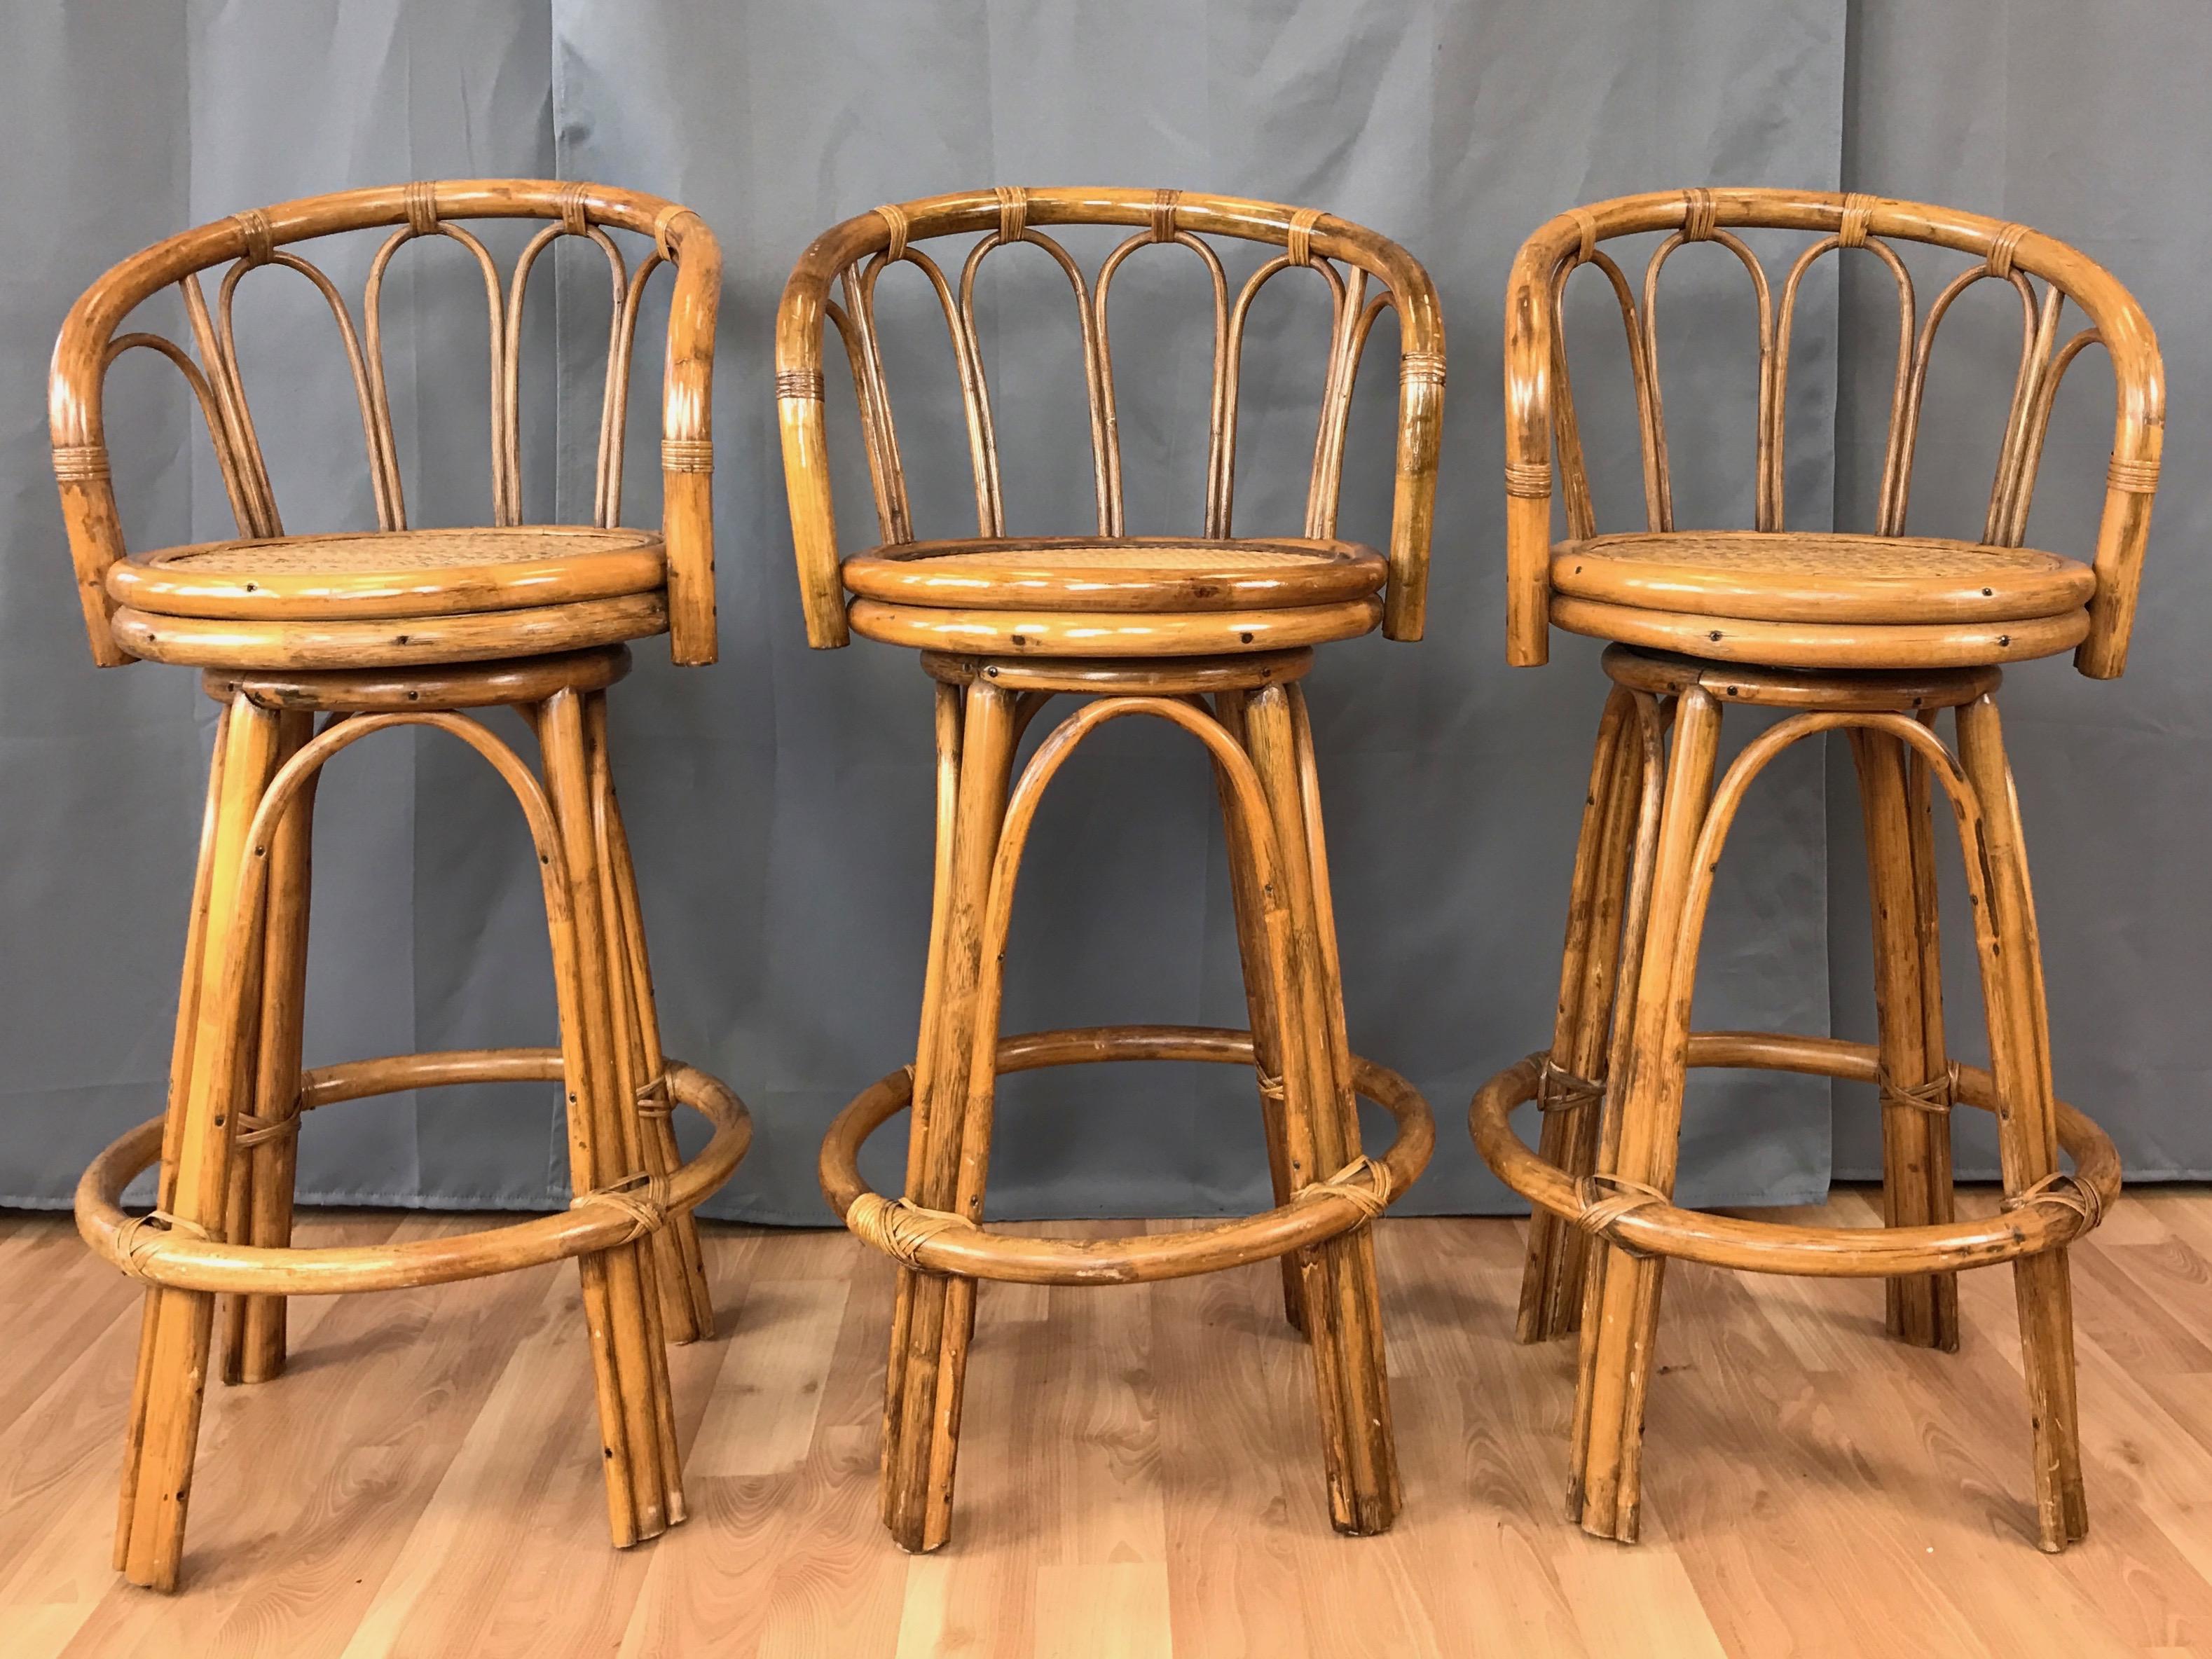 A set of three late 1960s-early 1970s bamboo and rattan swivel bar or counter stools.

Exceptionally well-crafted of bent bamboo with a 360-degree swivel seat. Rattan-wrapped joinery details throughout. Displays a handsome hint of natural patina